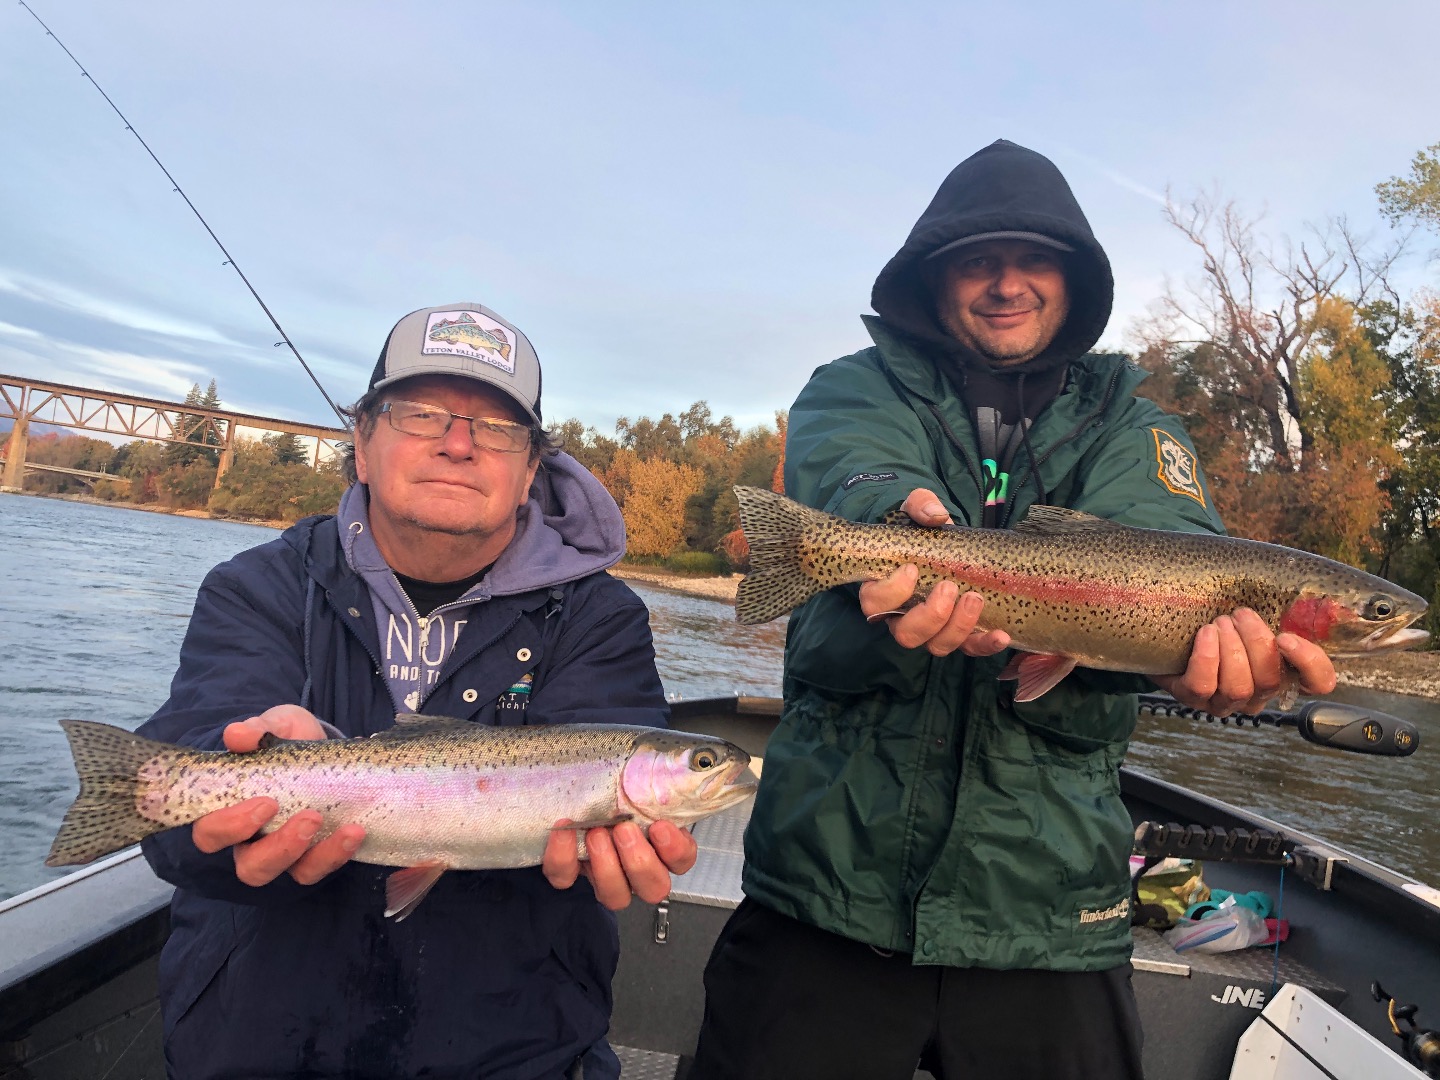 Big numbers day on the Lower Sac steelhead/trout grounds